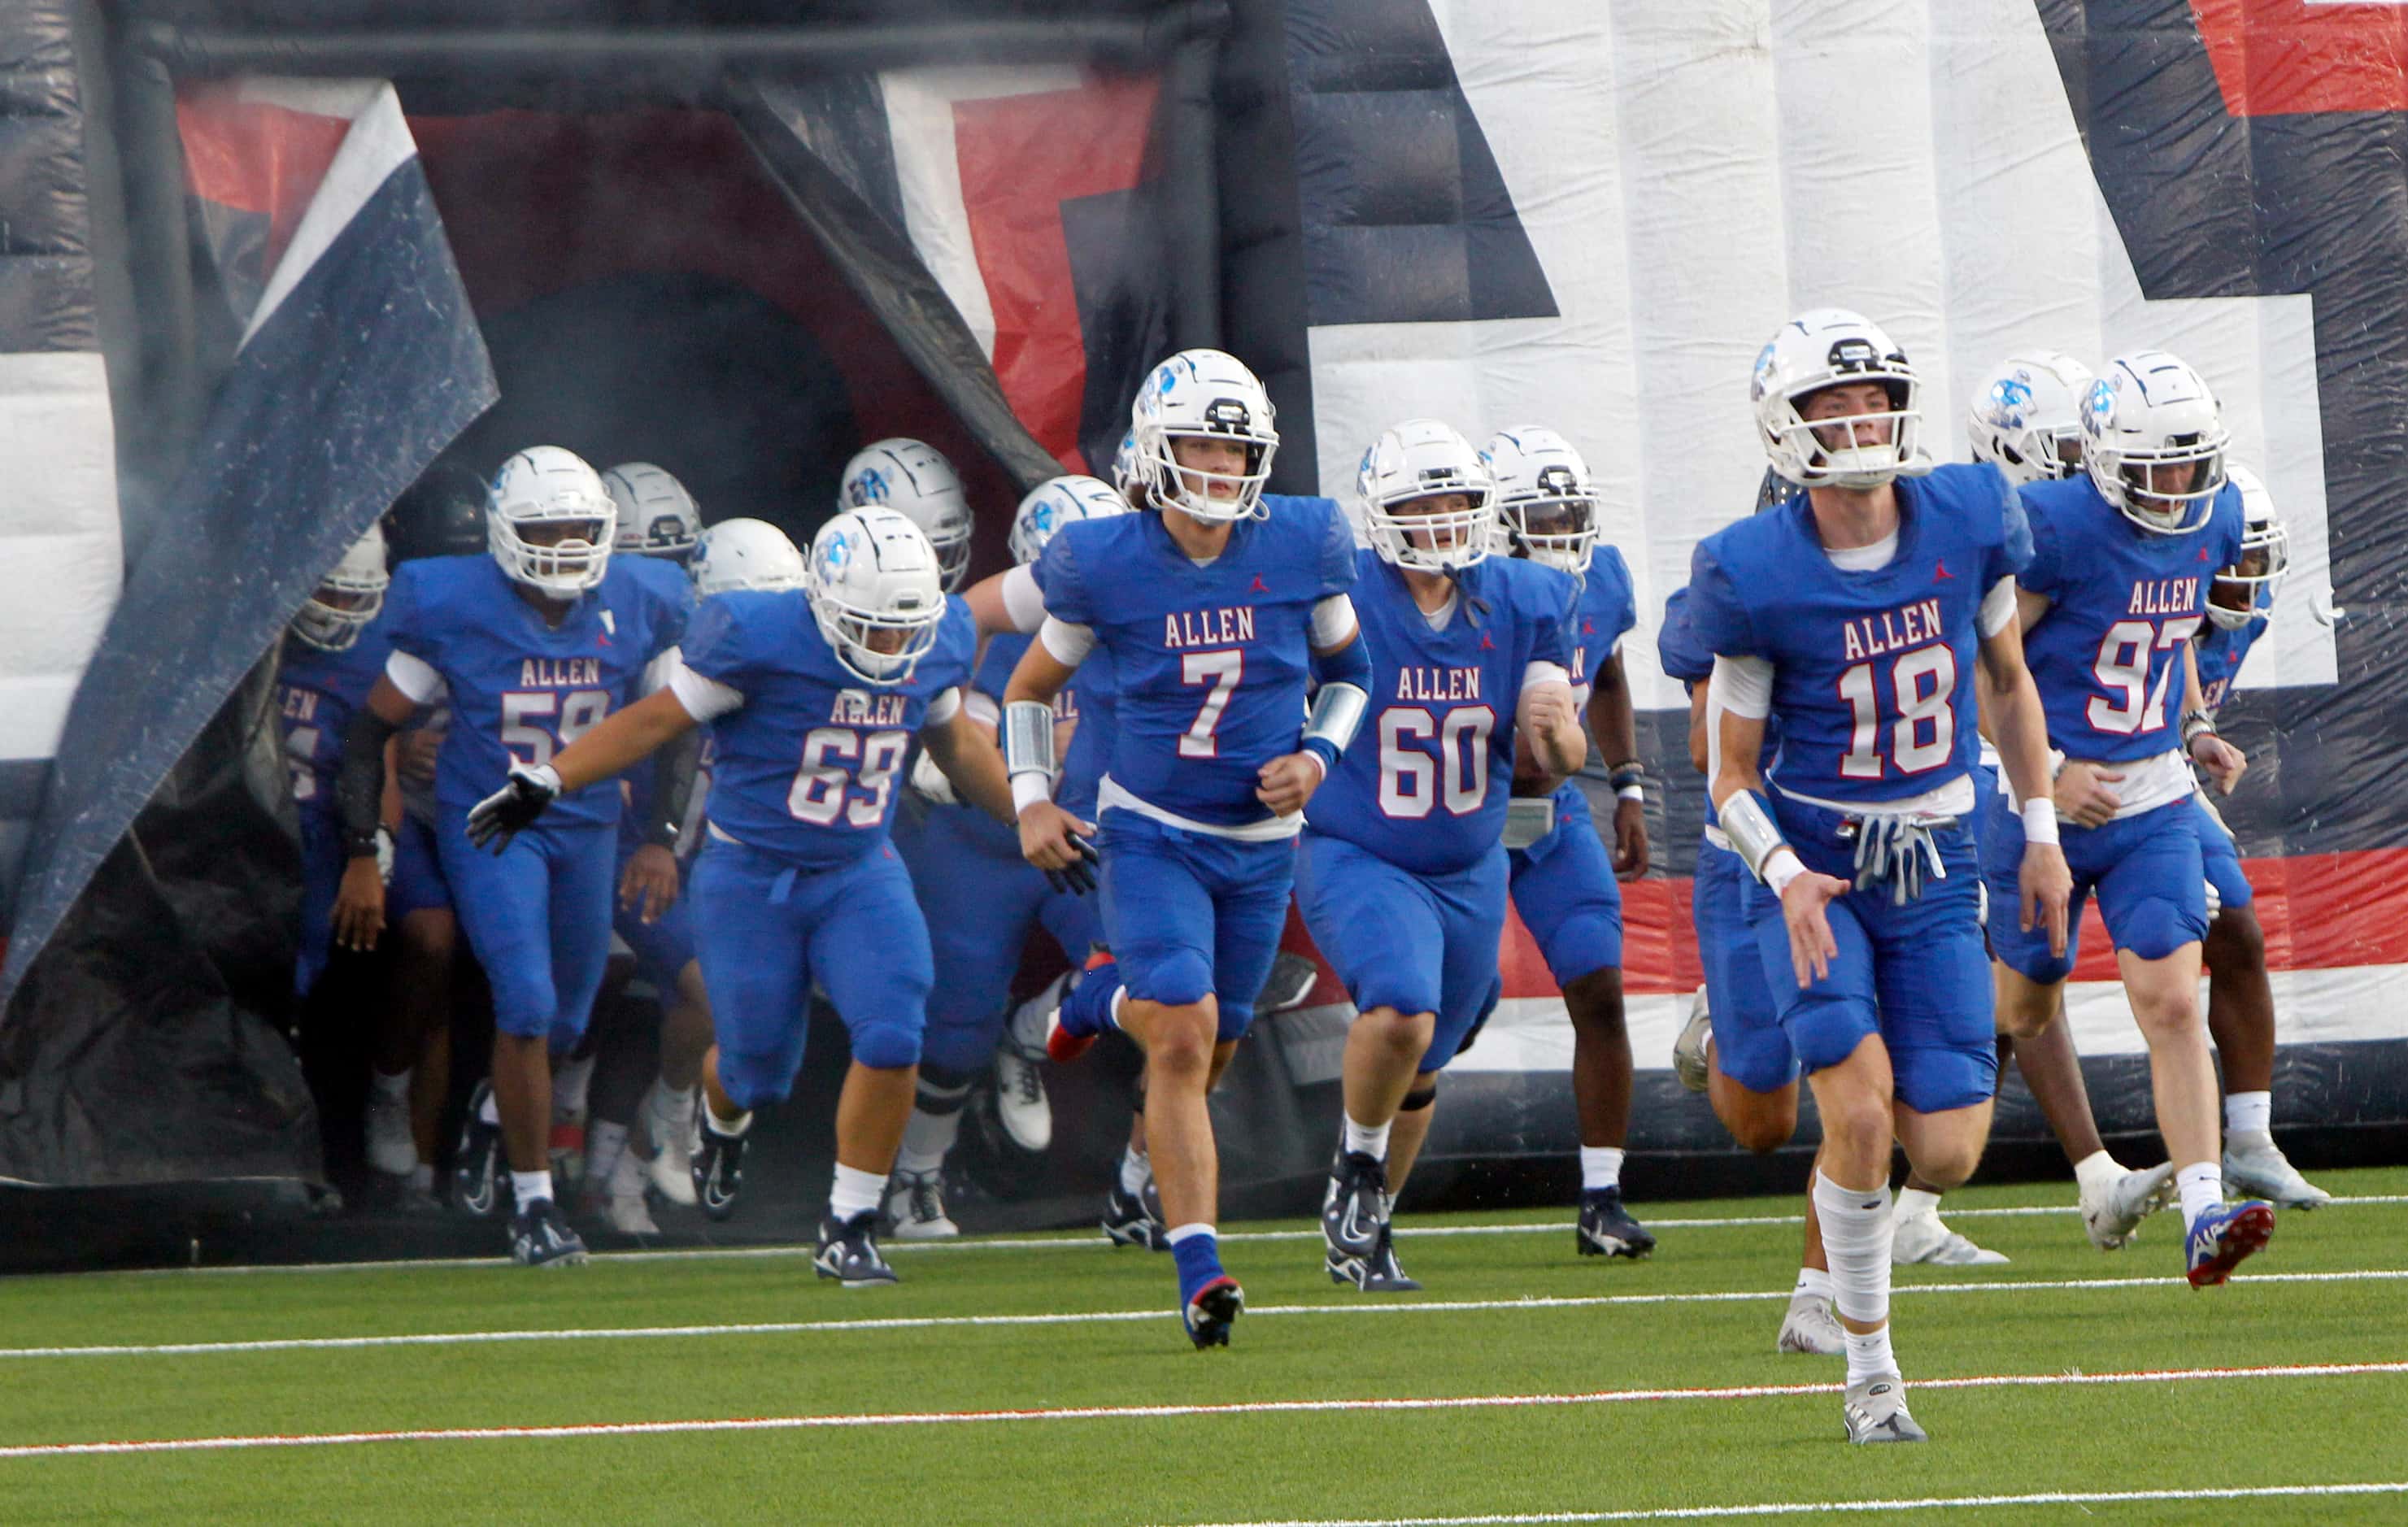 Allen Eagles players emerge from the team inflatable prior to the opening kickoff against...